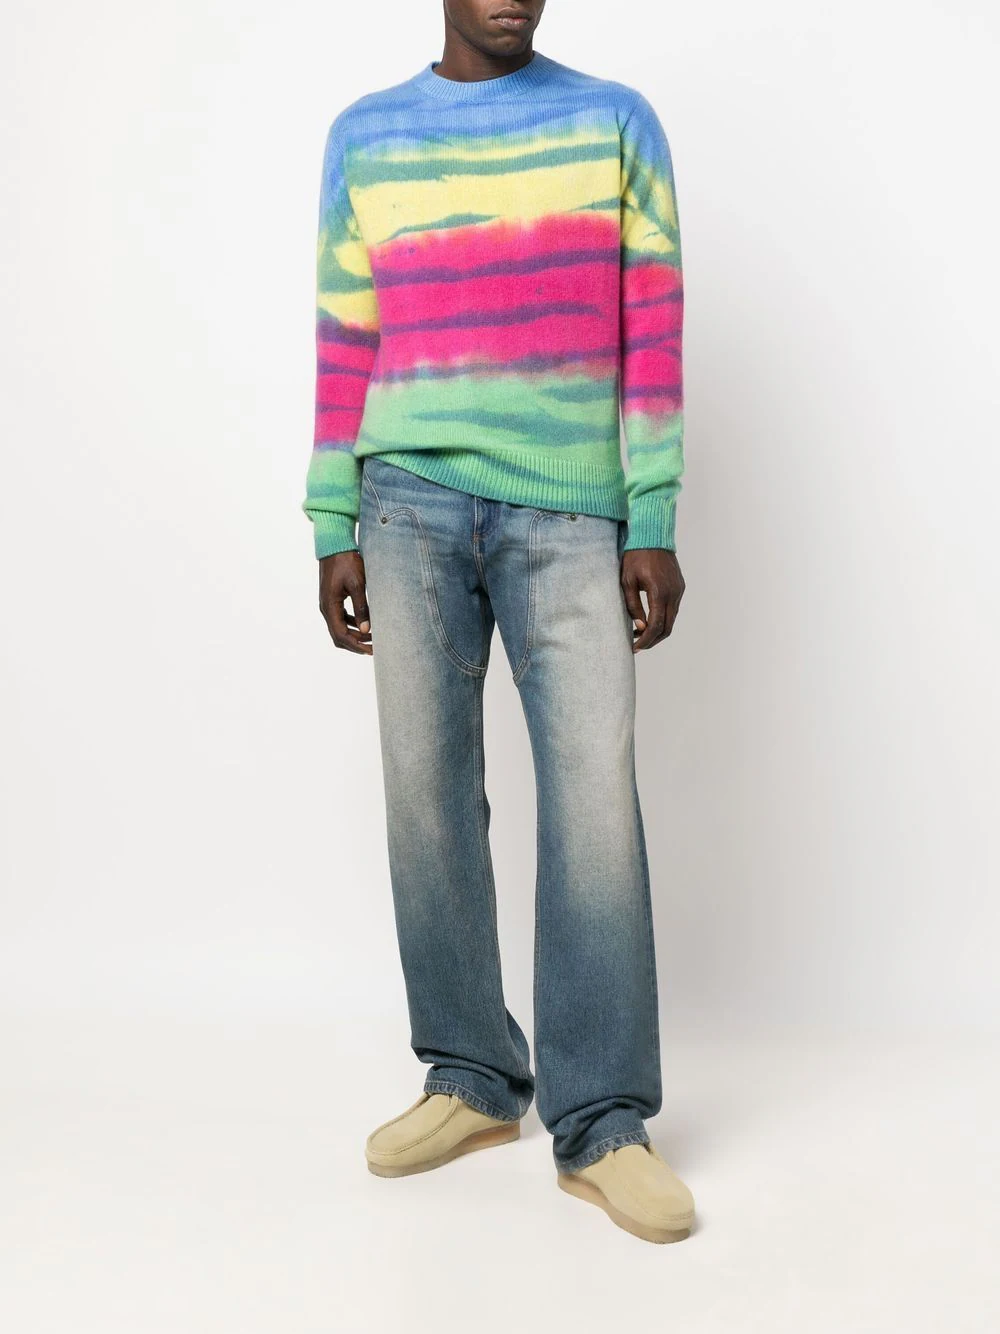 the-best-cashmere-sweaters-for-men-style-rave